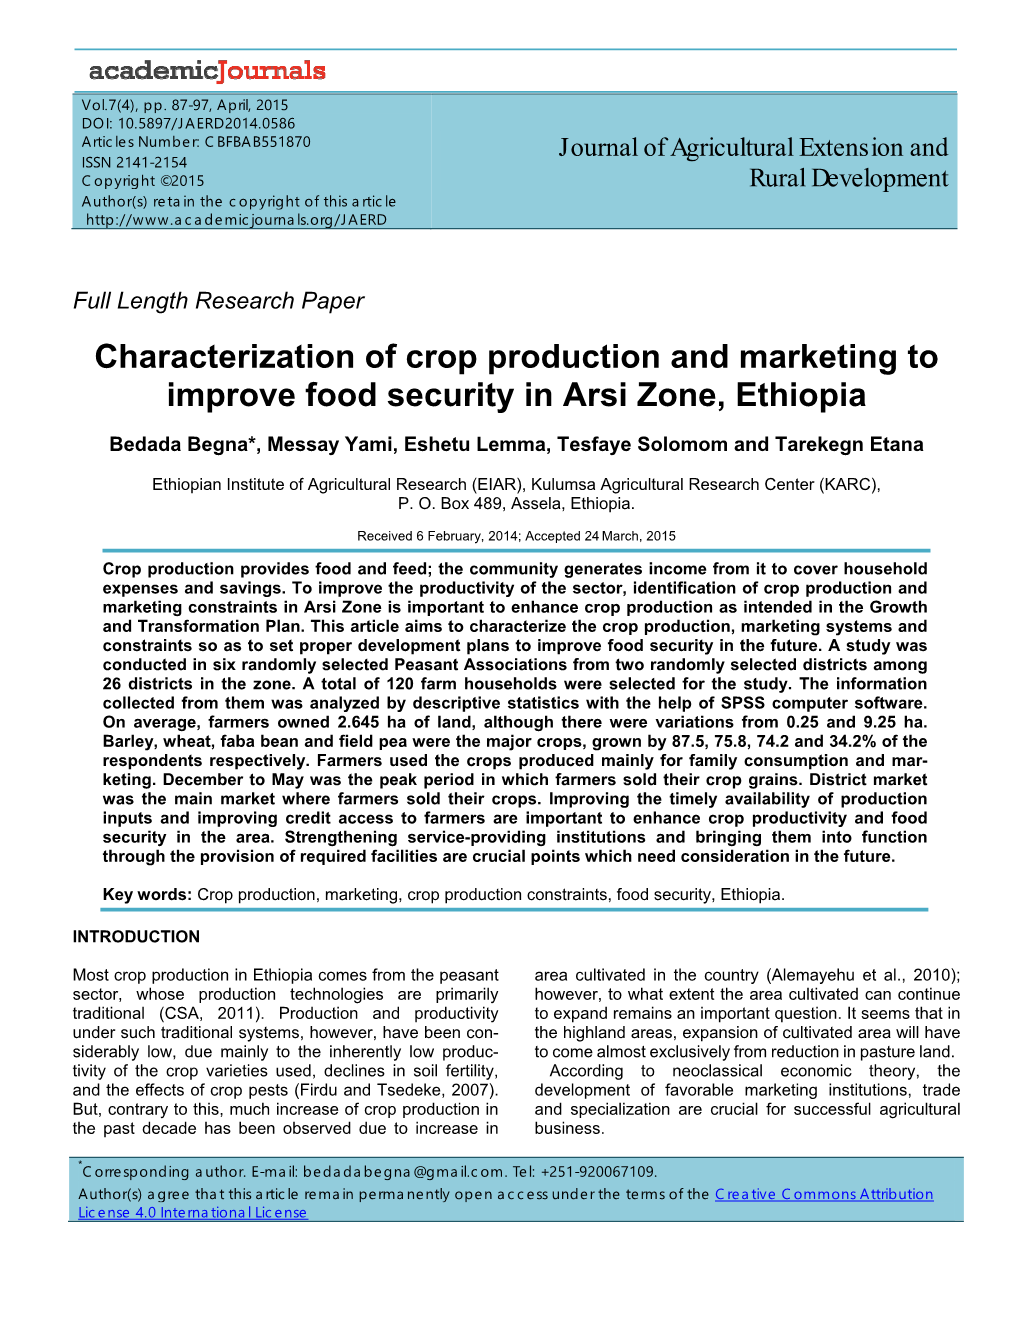 Characterization of Crop Production and Marketing to Improve Food Security in Arsi Zone, Ethiopia